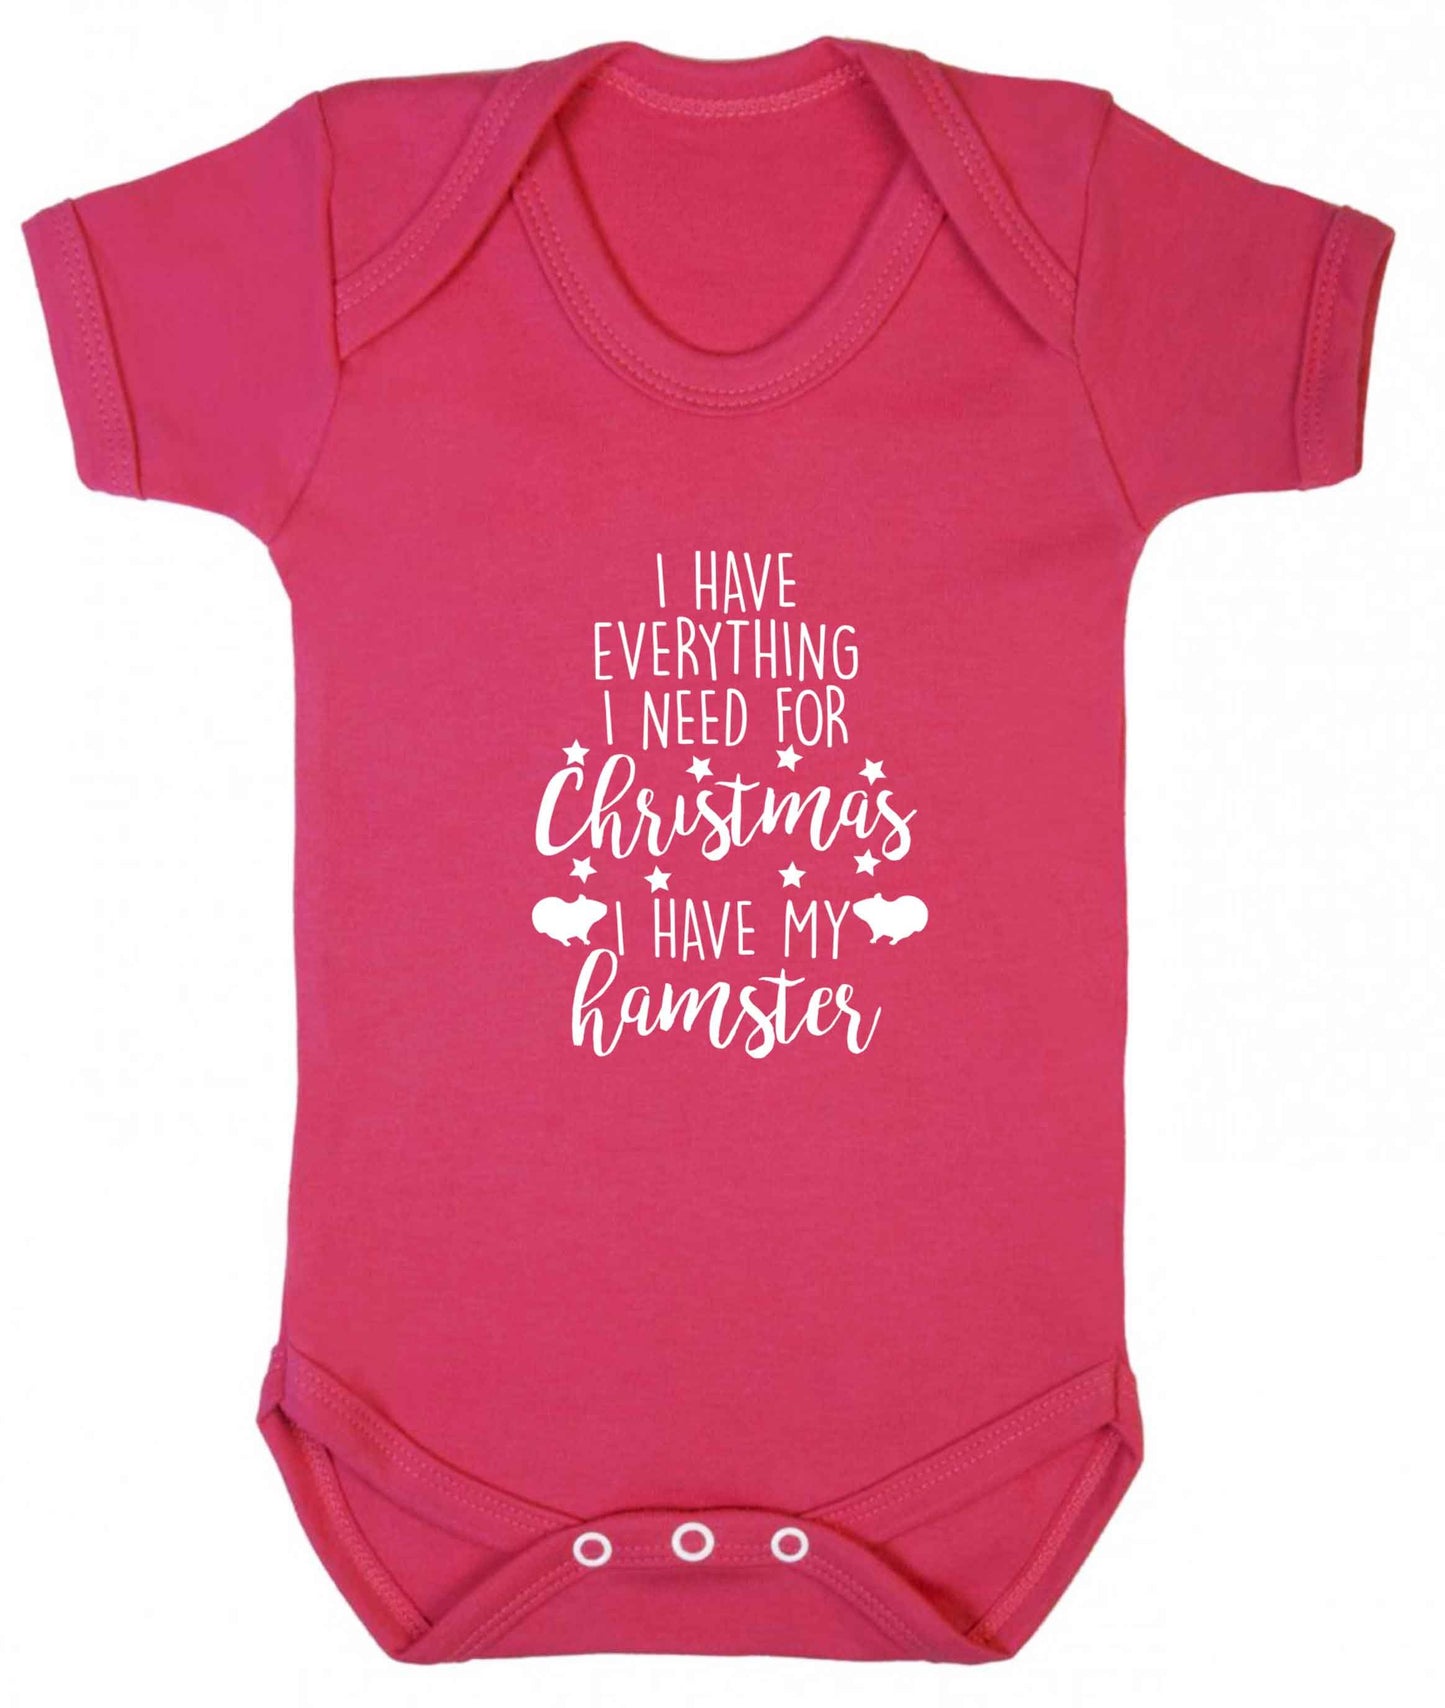 I have everything I need for Christmas I have my hamster baby vest dark pink 18-24 months